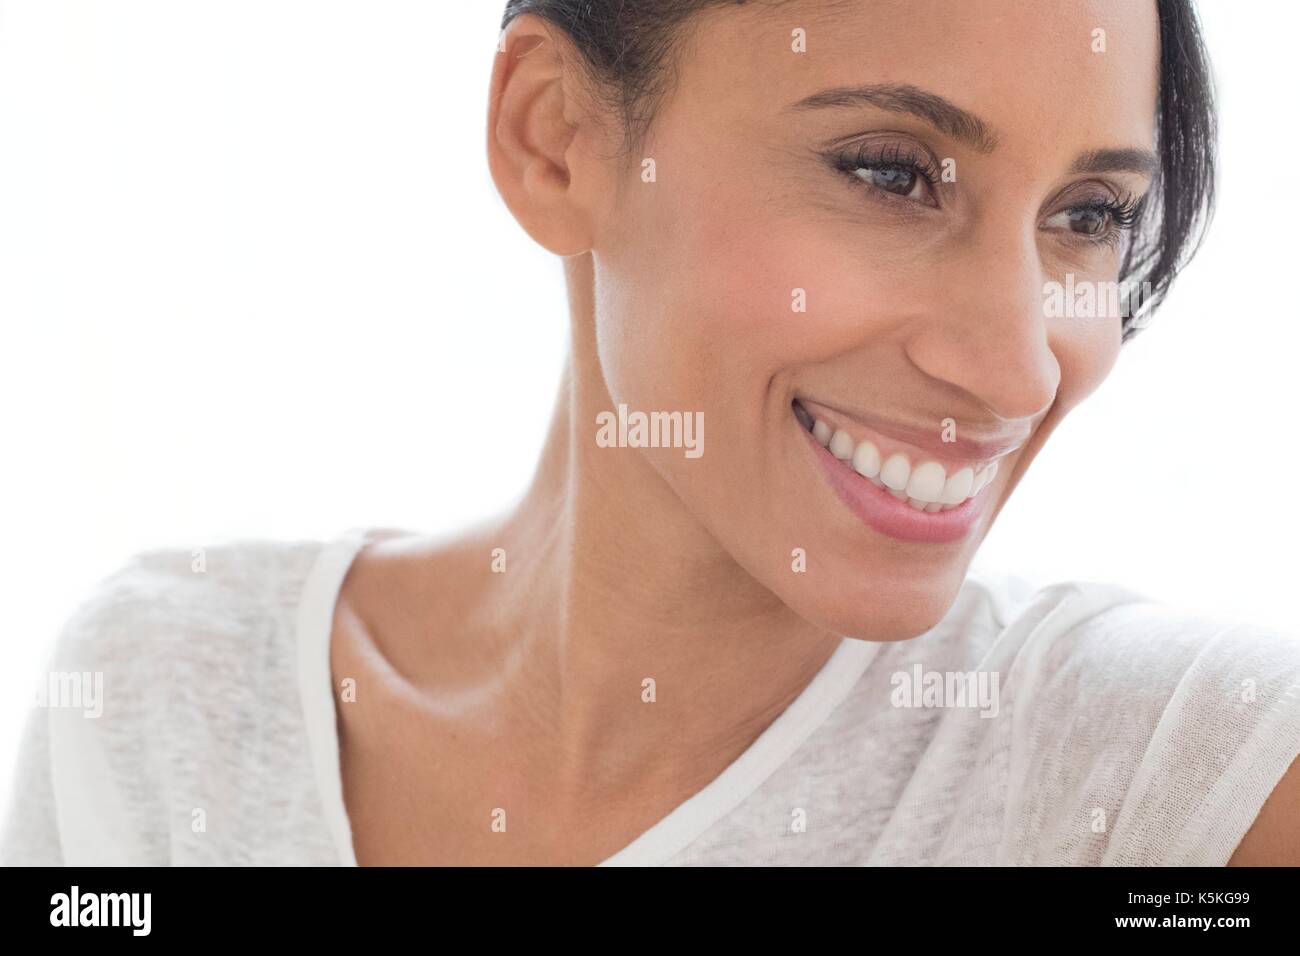 Mid adult woman smiling and looking away, portrait. Stock Photo